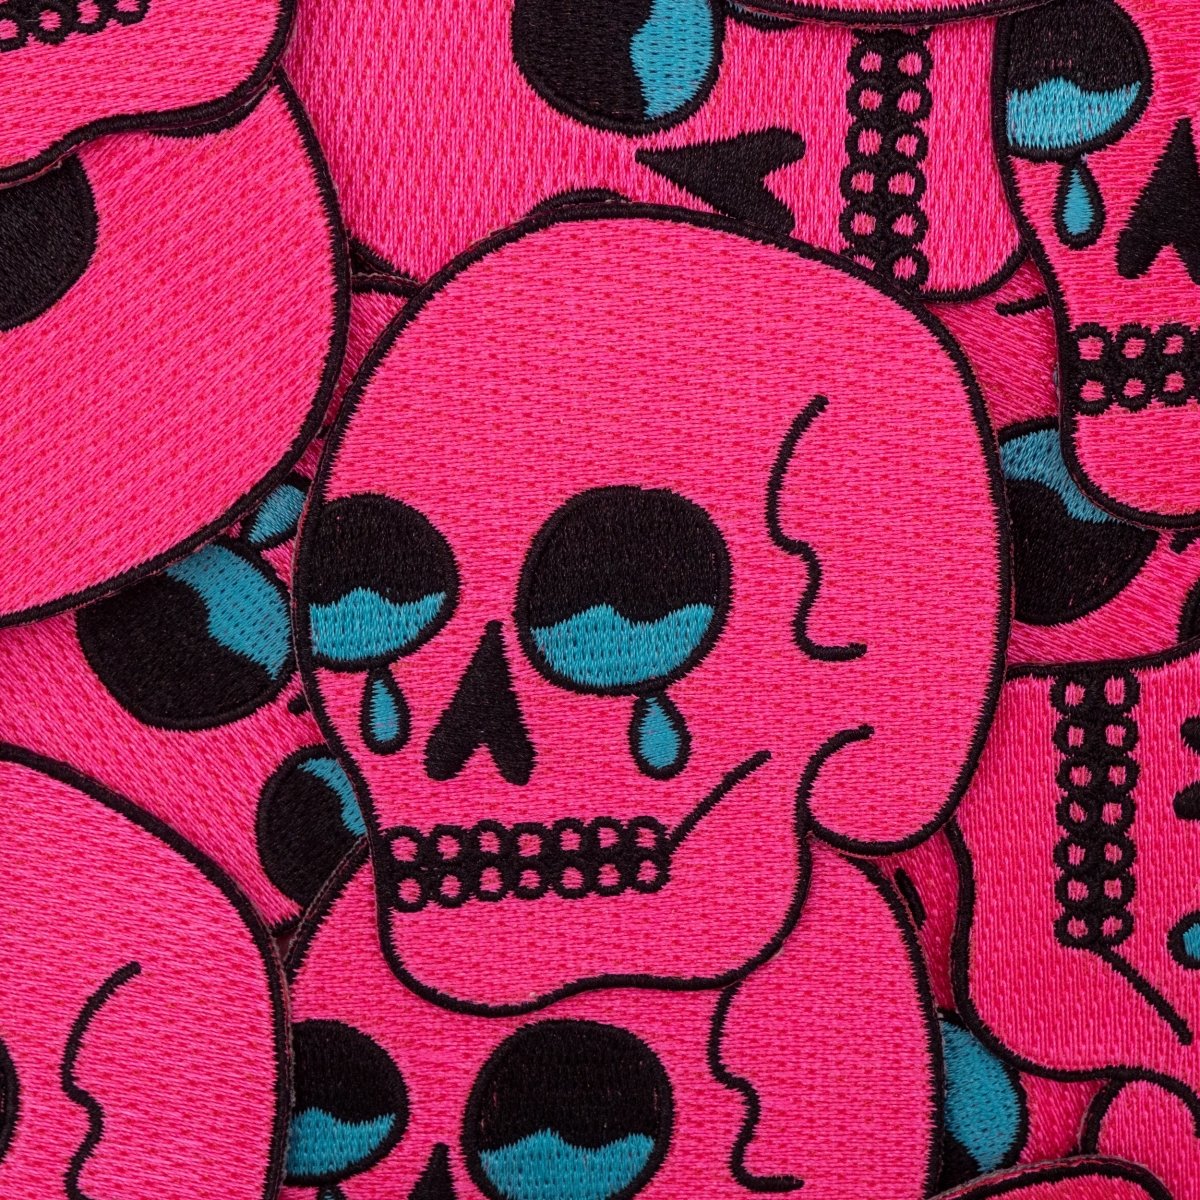 Pink crying skull patch - Patch - Pretty Bad Co.